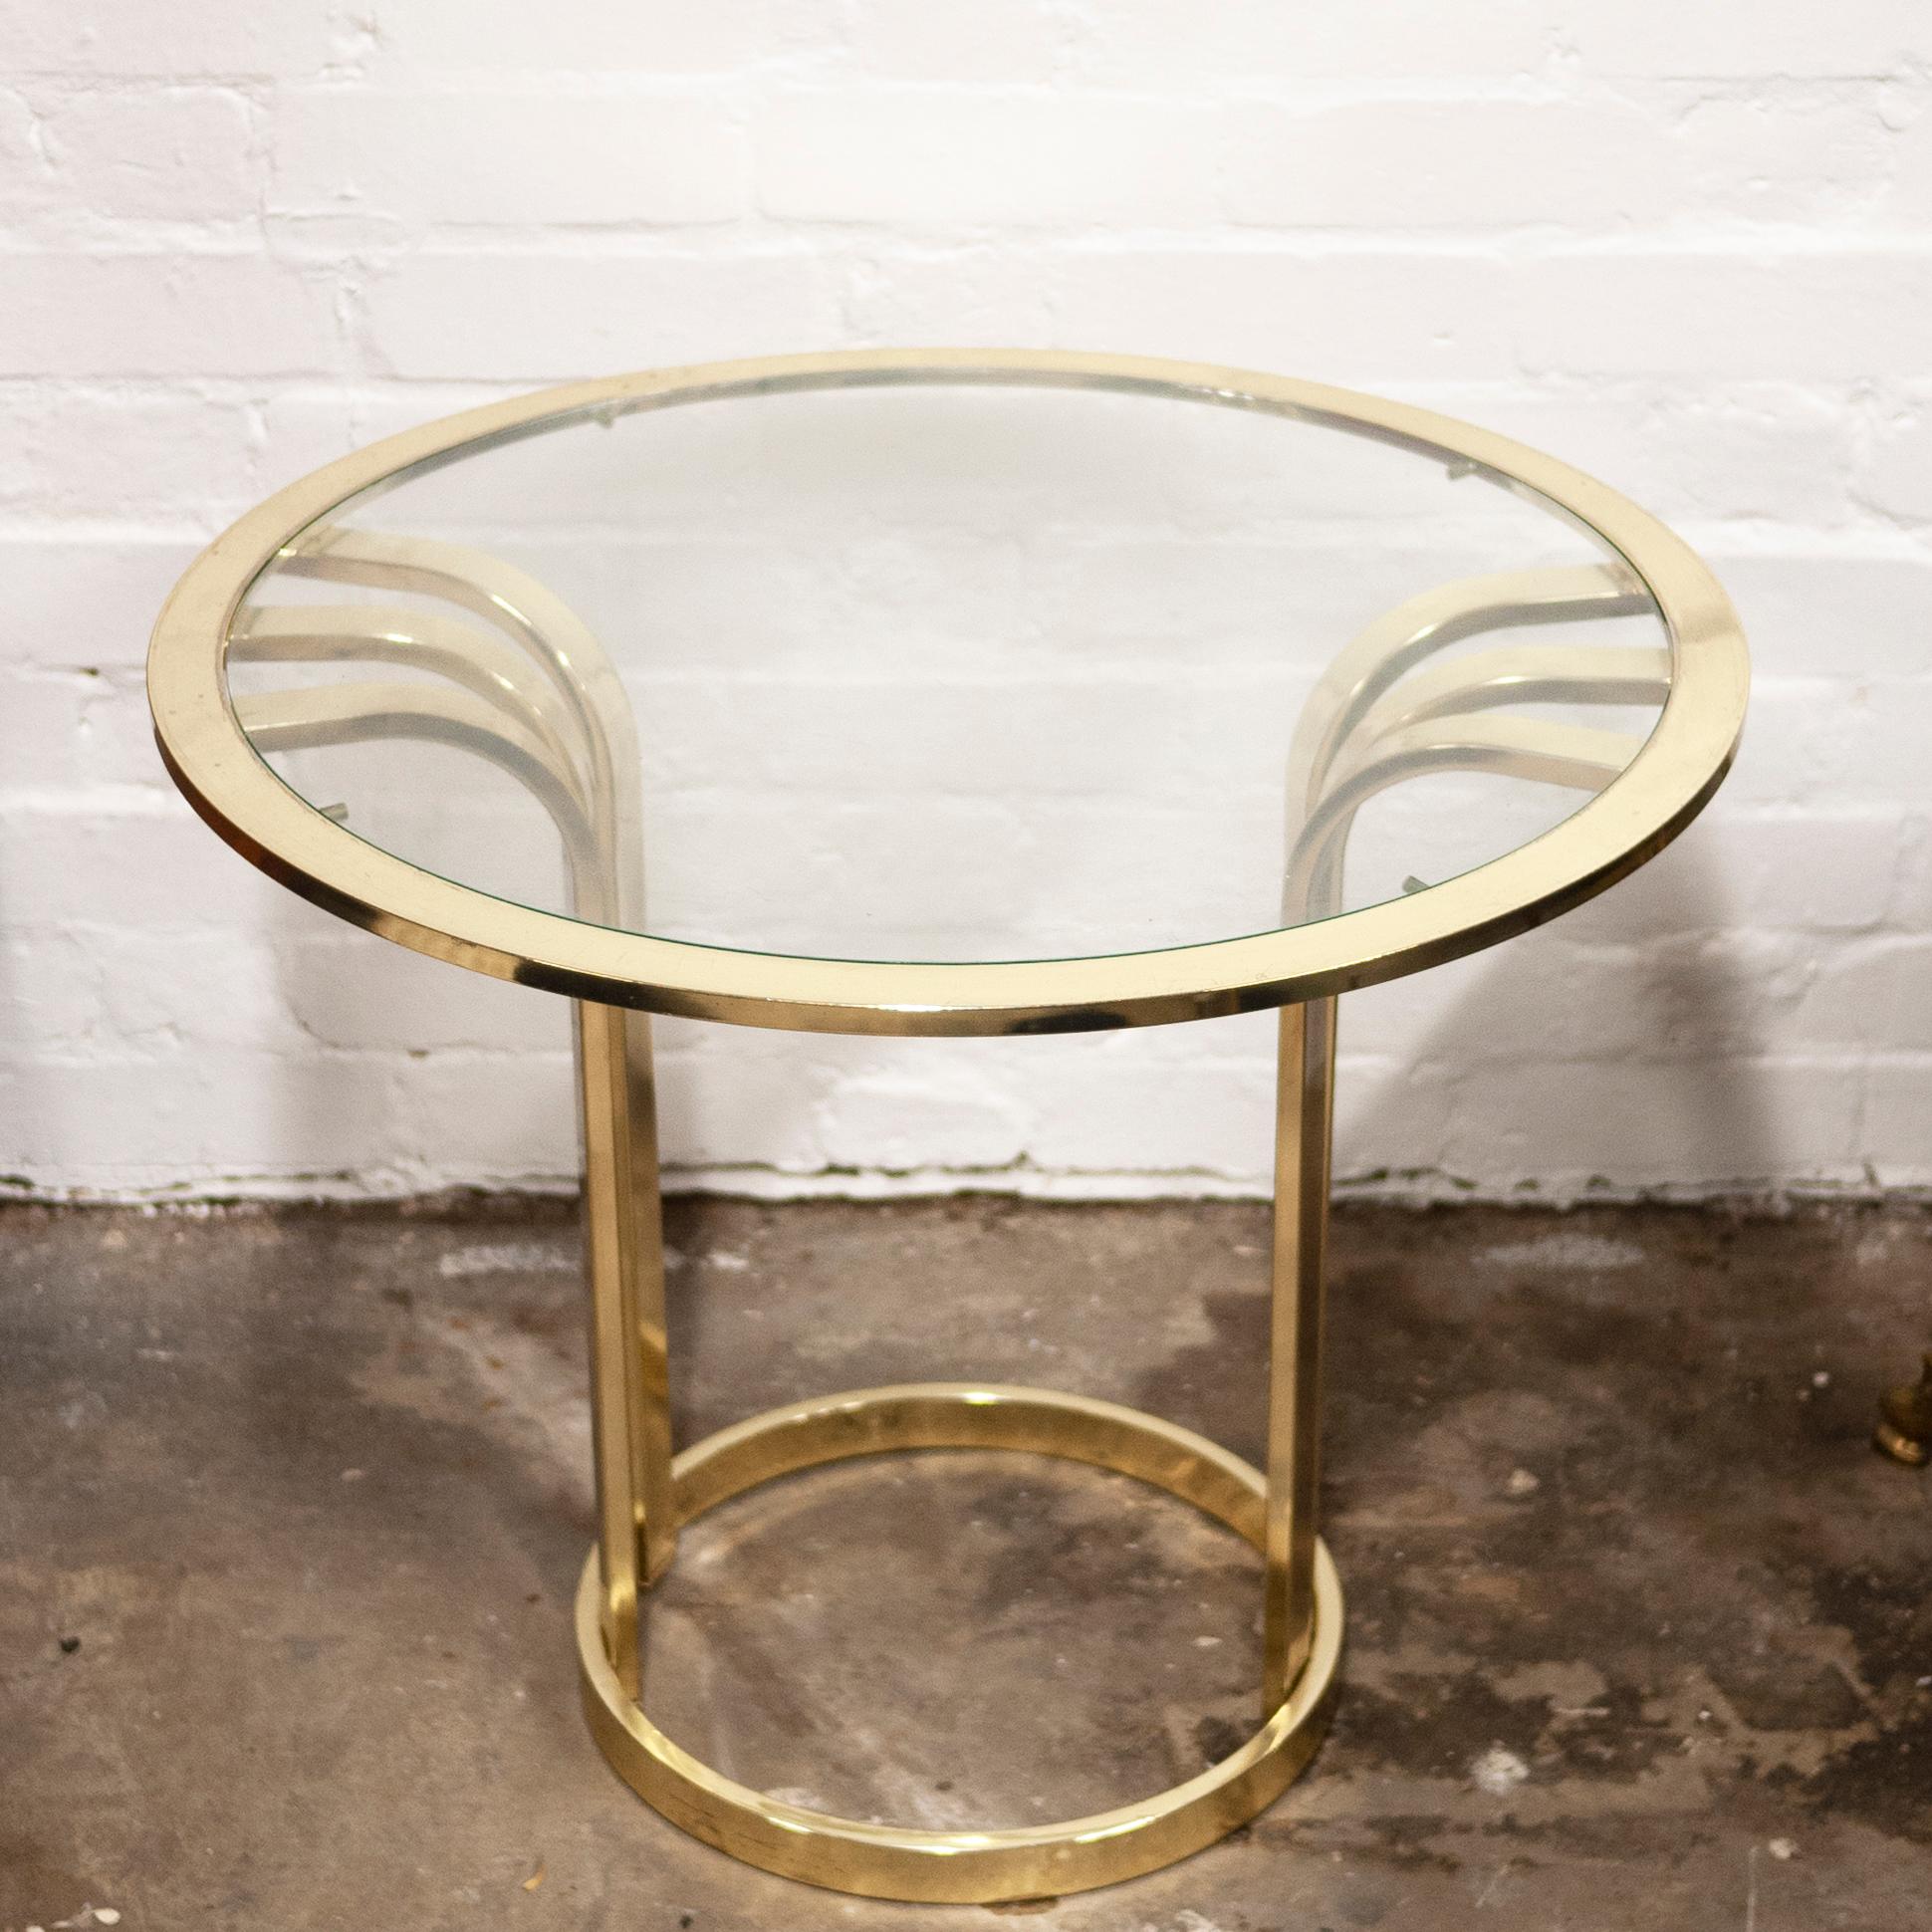 A round brass side table from the 1970s. The table features curved brass sides and displays Deco inspiration.

Manufacturer - Unknown

Design Period - 1970 to 1979

Attribution Marks - n/a

Detailed Condition - Good with minimal